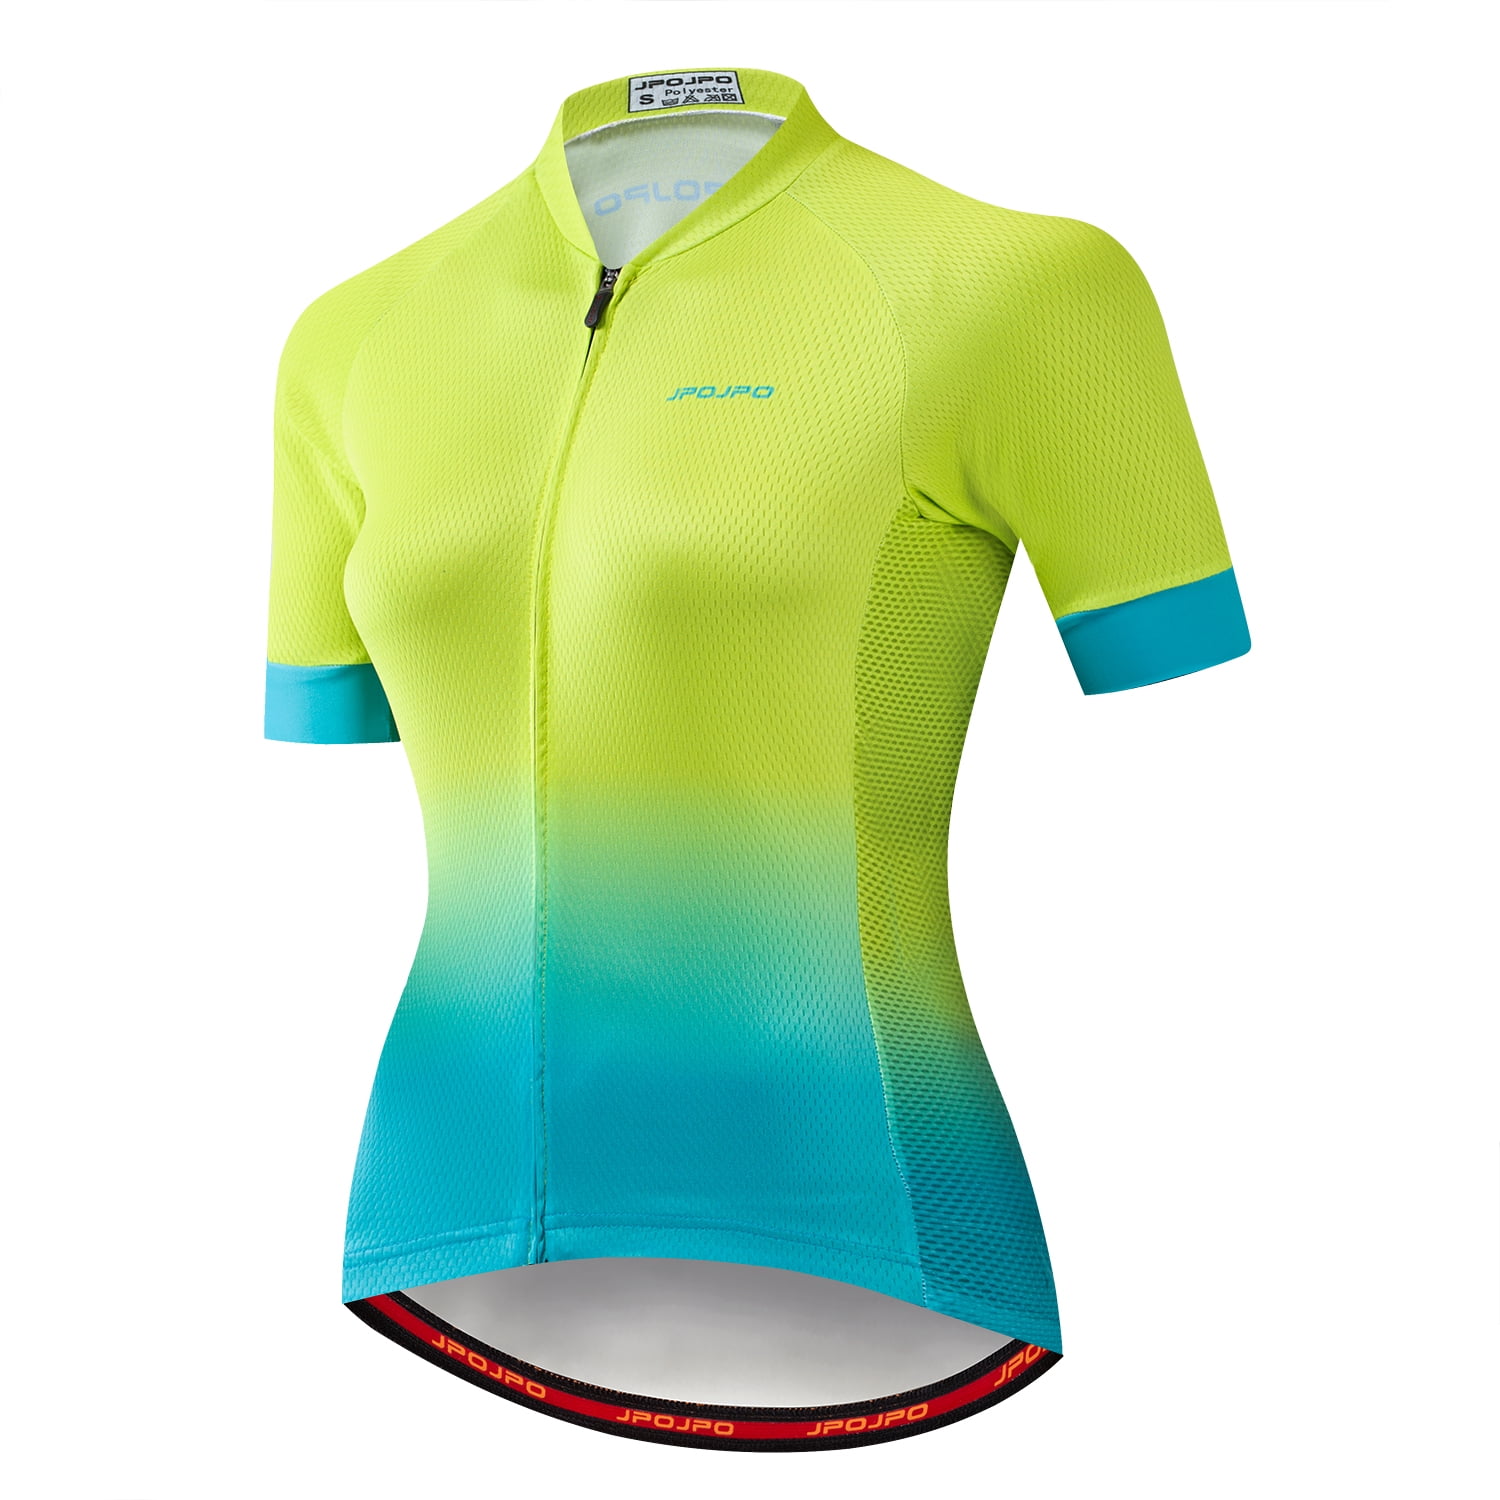 Cycling Jersey Women Bicycle Short Sleeve Bike Shirt Breathable Clothing Sport Tops 